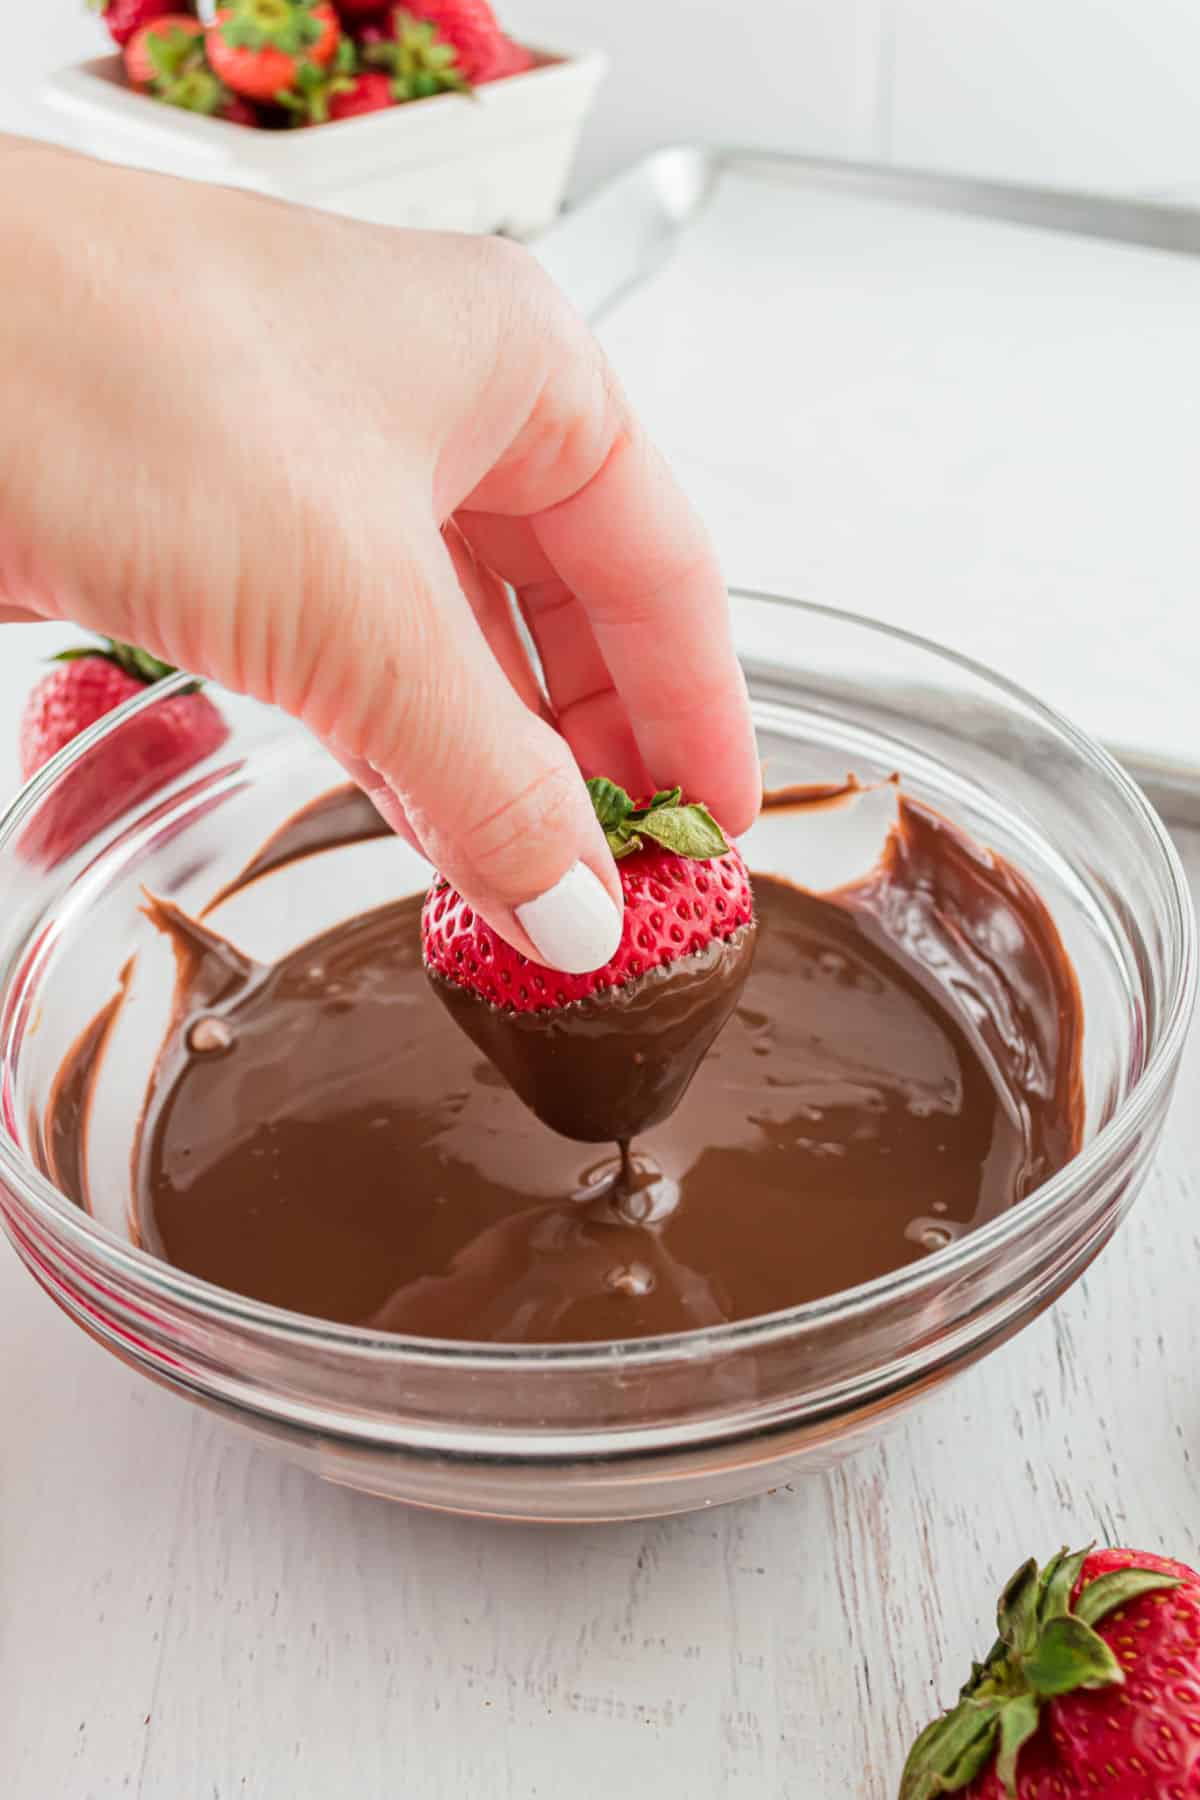 Strawberry dipped in melted chocolate